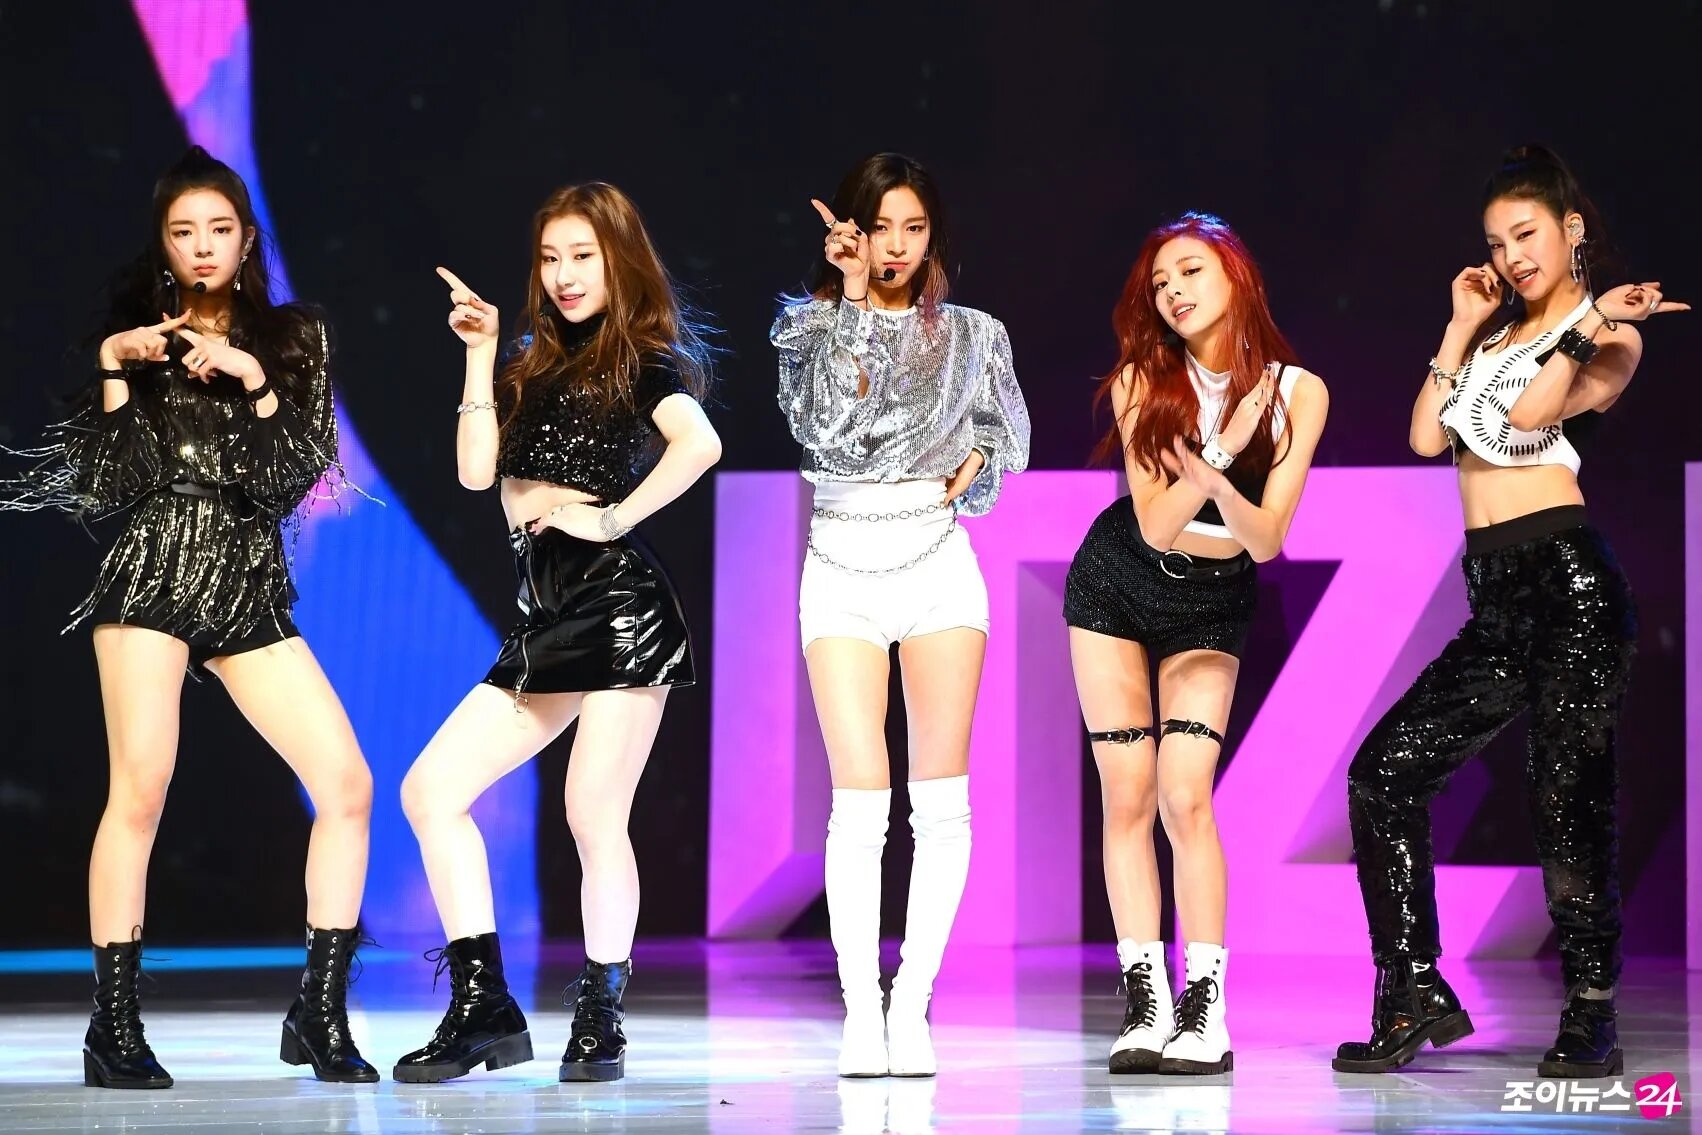 February 12, 2019 ITZY 'IT'z Different' Debut Showcase | Kpopping